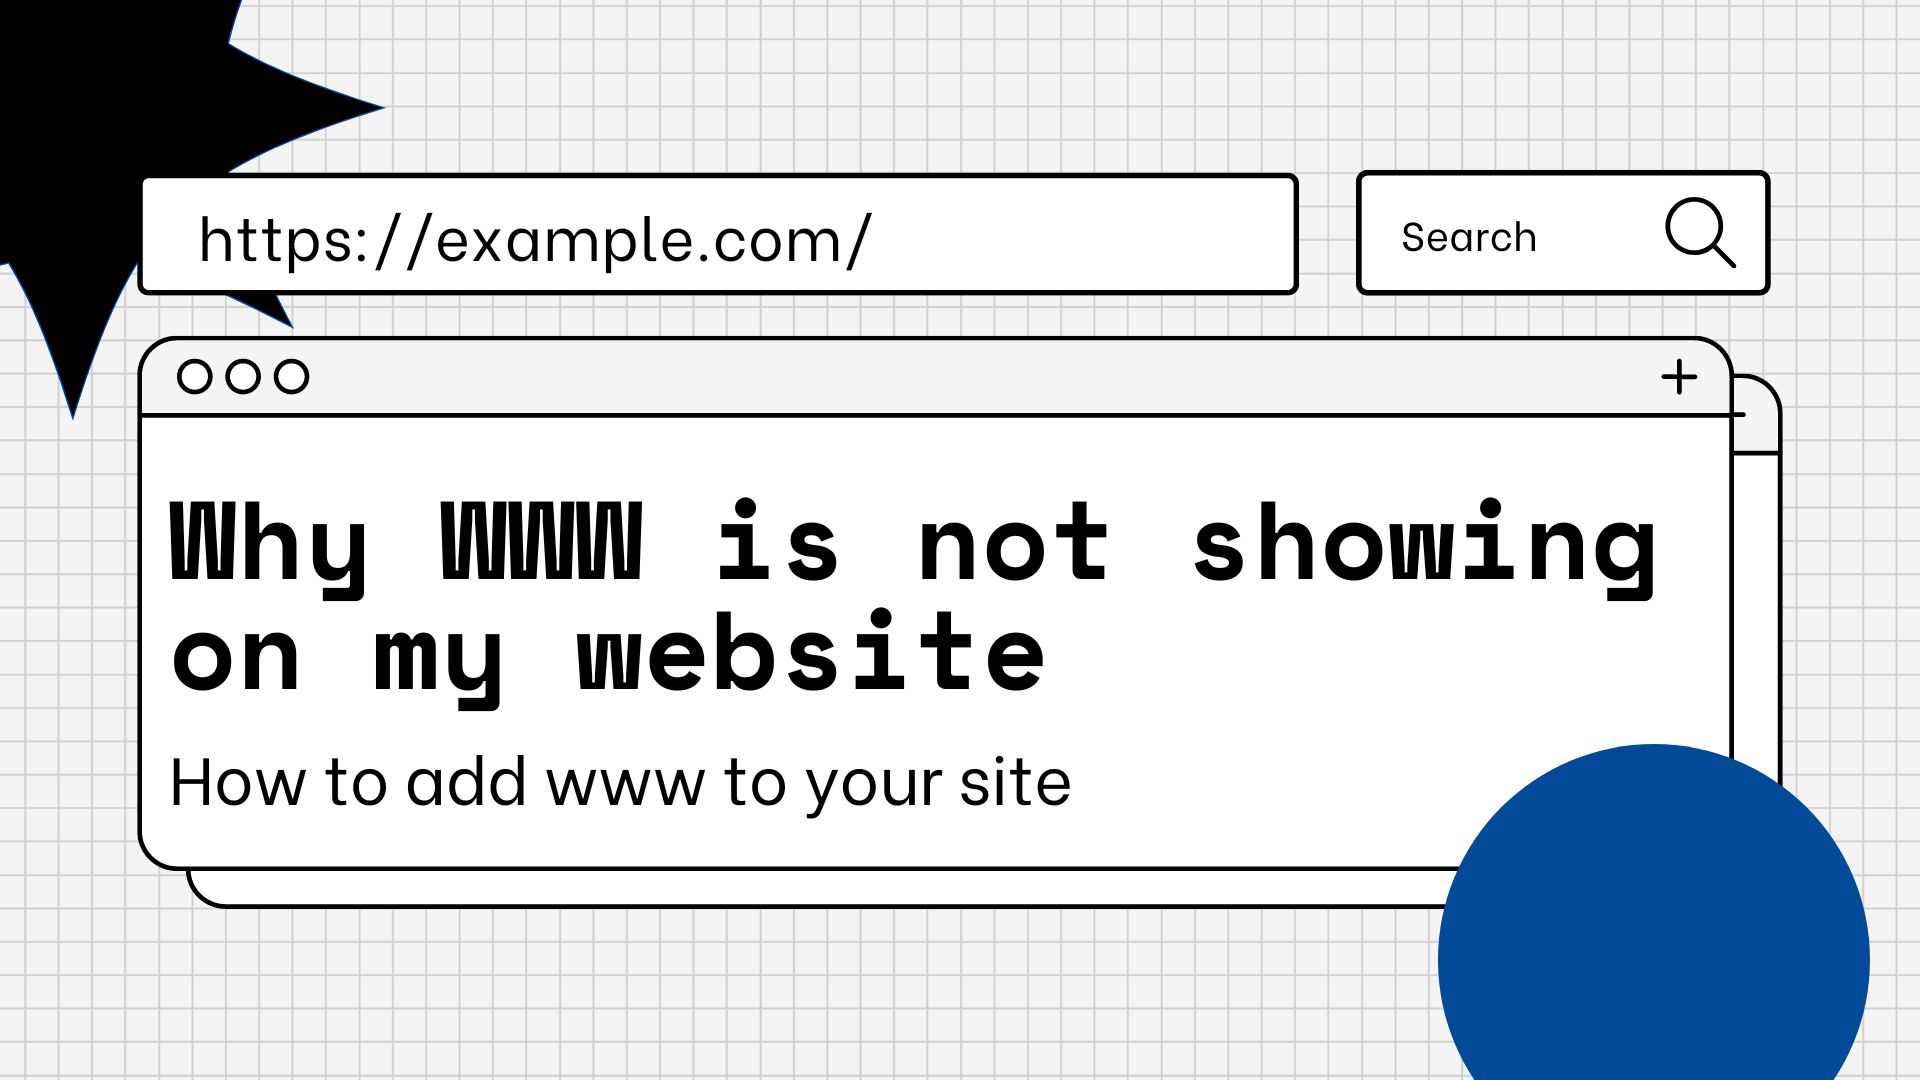 why www is not showing in my website? How to add www